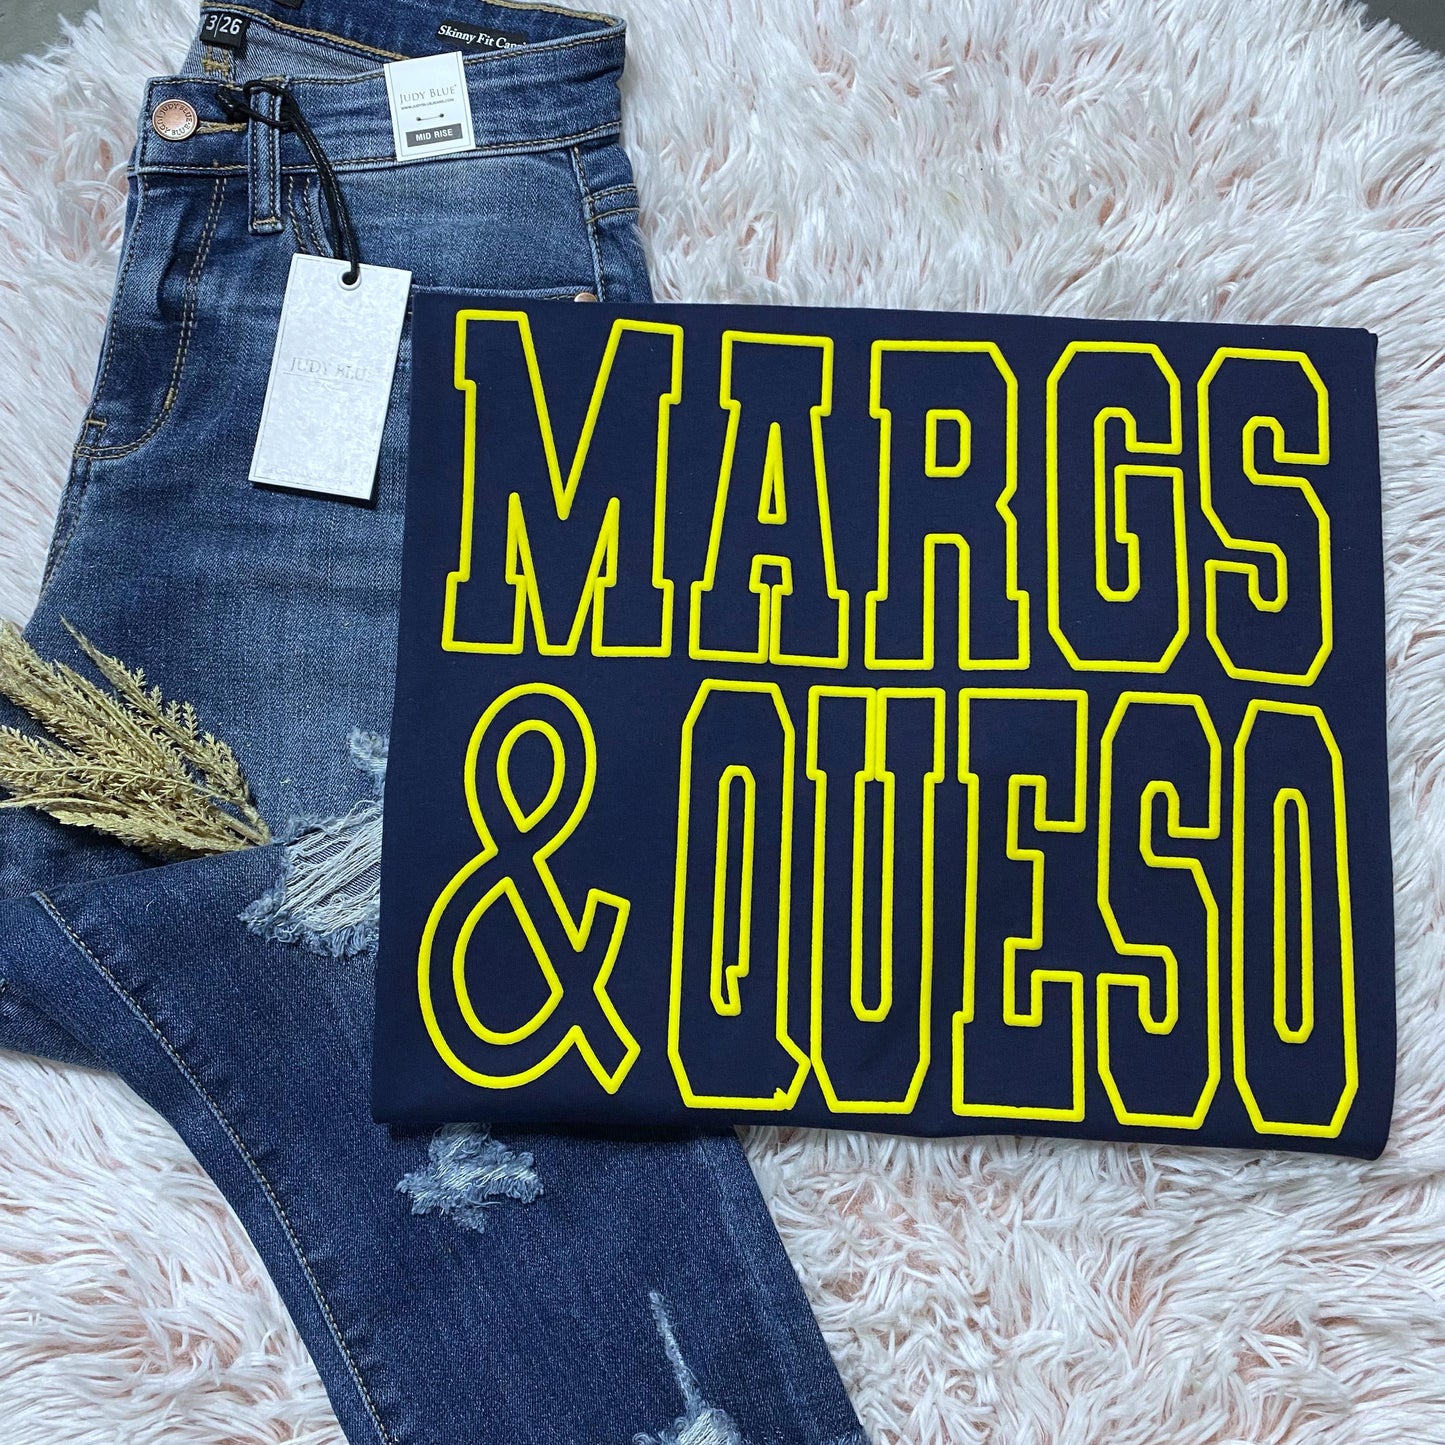 Margs and queso - FamFancy Boutique